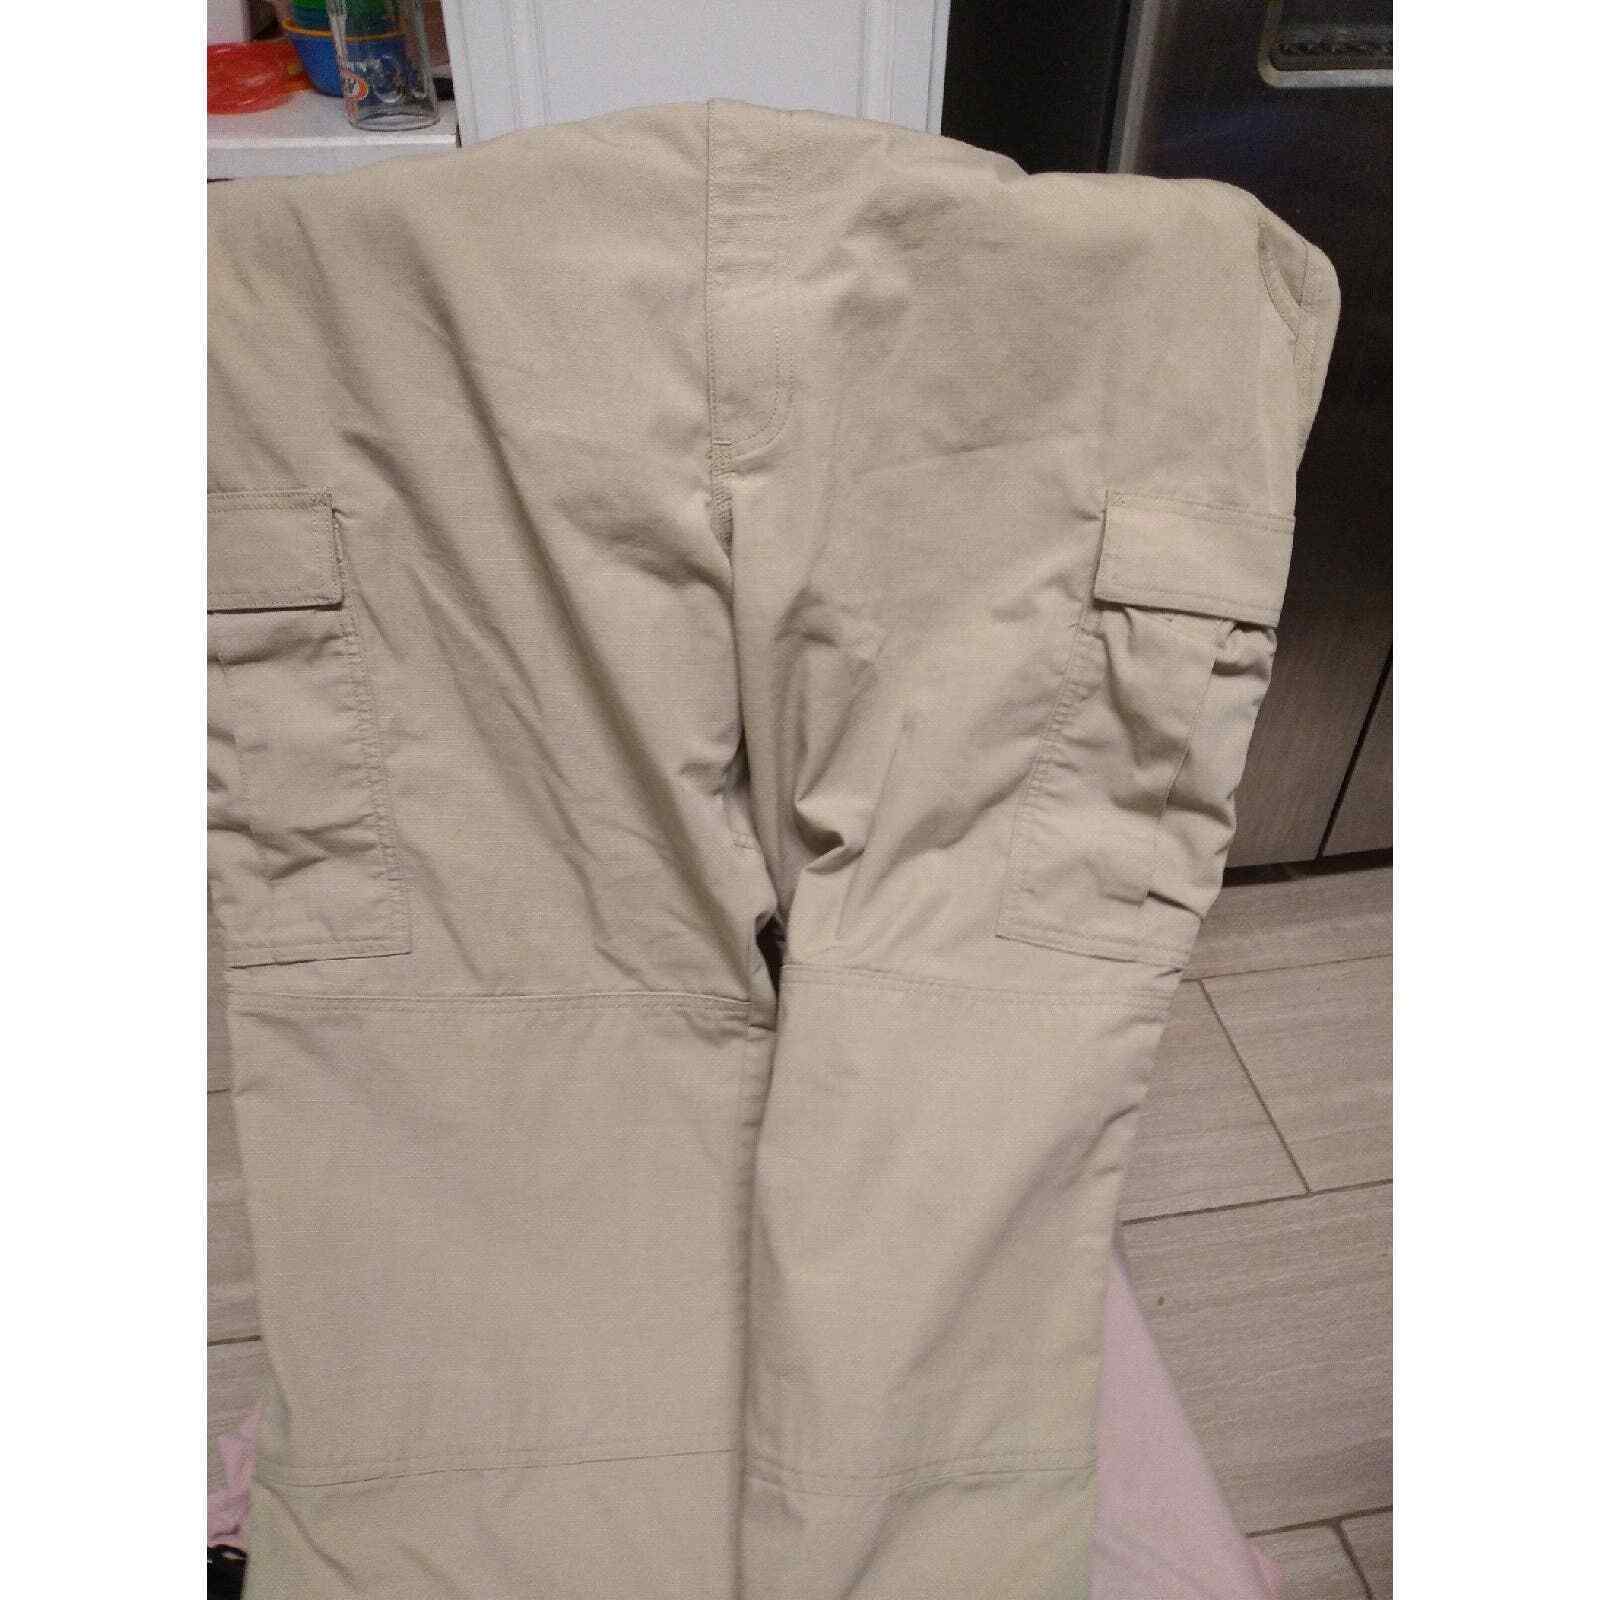 Primary image for 5.11 Tactical Pants Size 2XL Tan